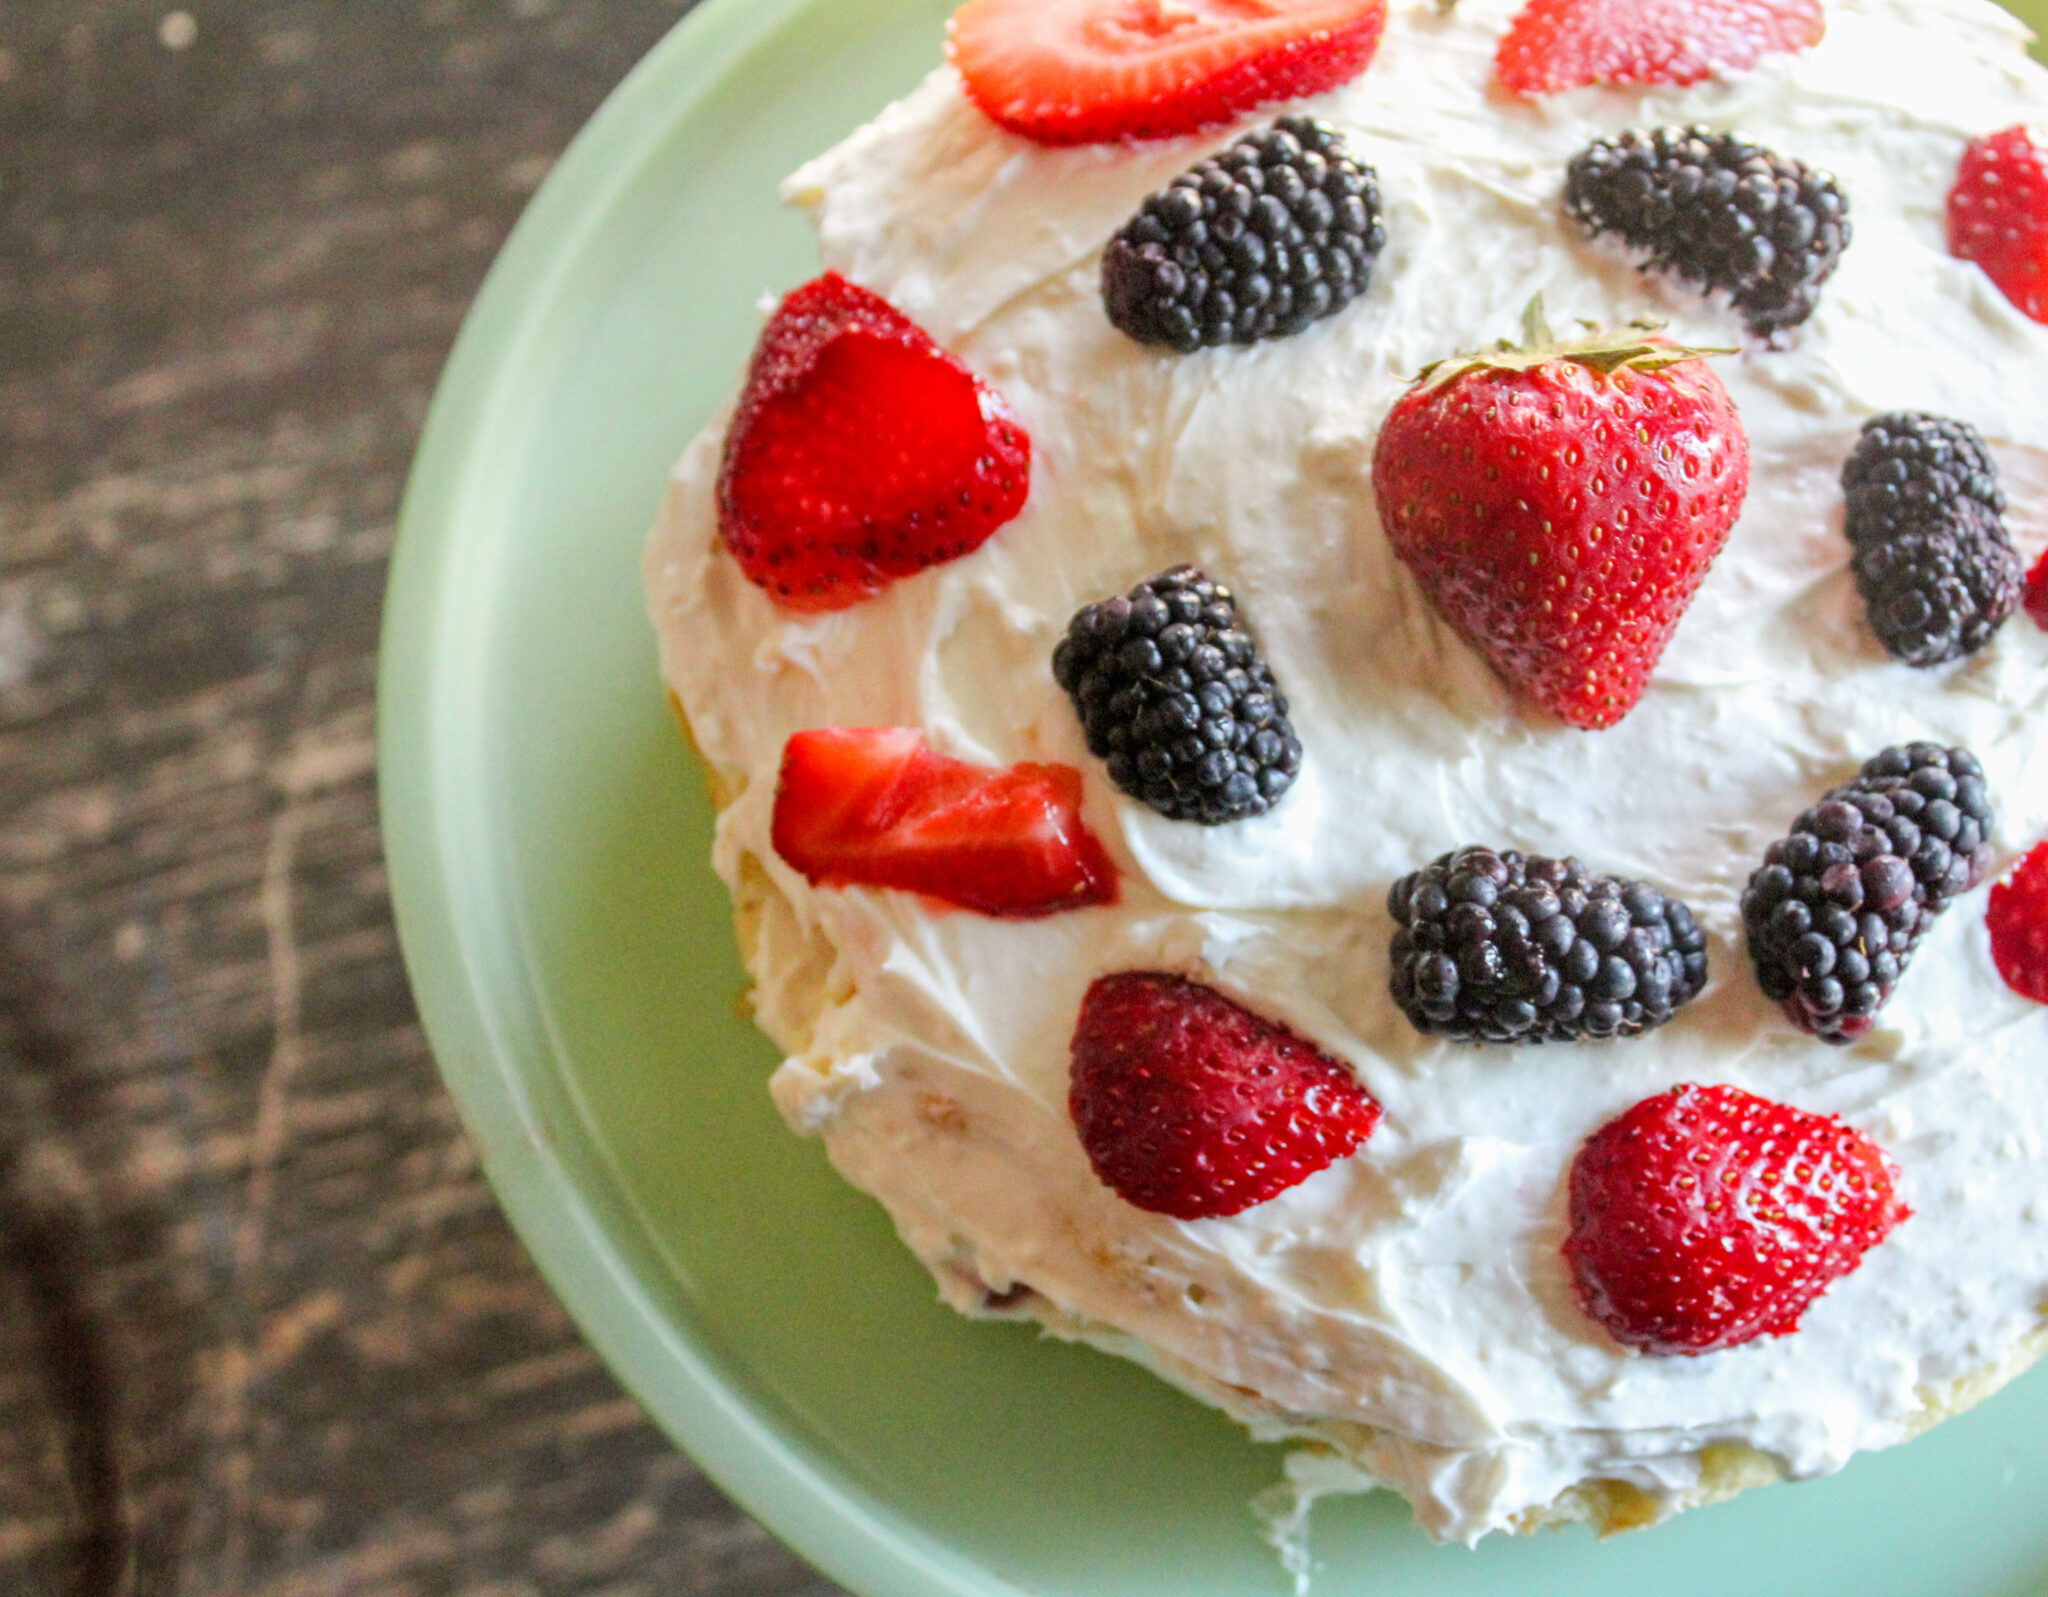 My Berries and Cream Cake is not only delicious but beautiful! It has two decadent layers stuffed with a cream cheese icing and berries! 